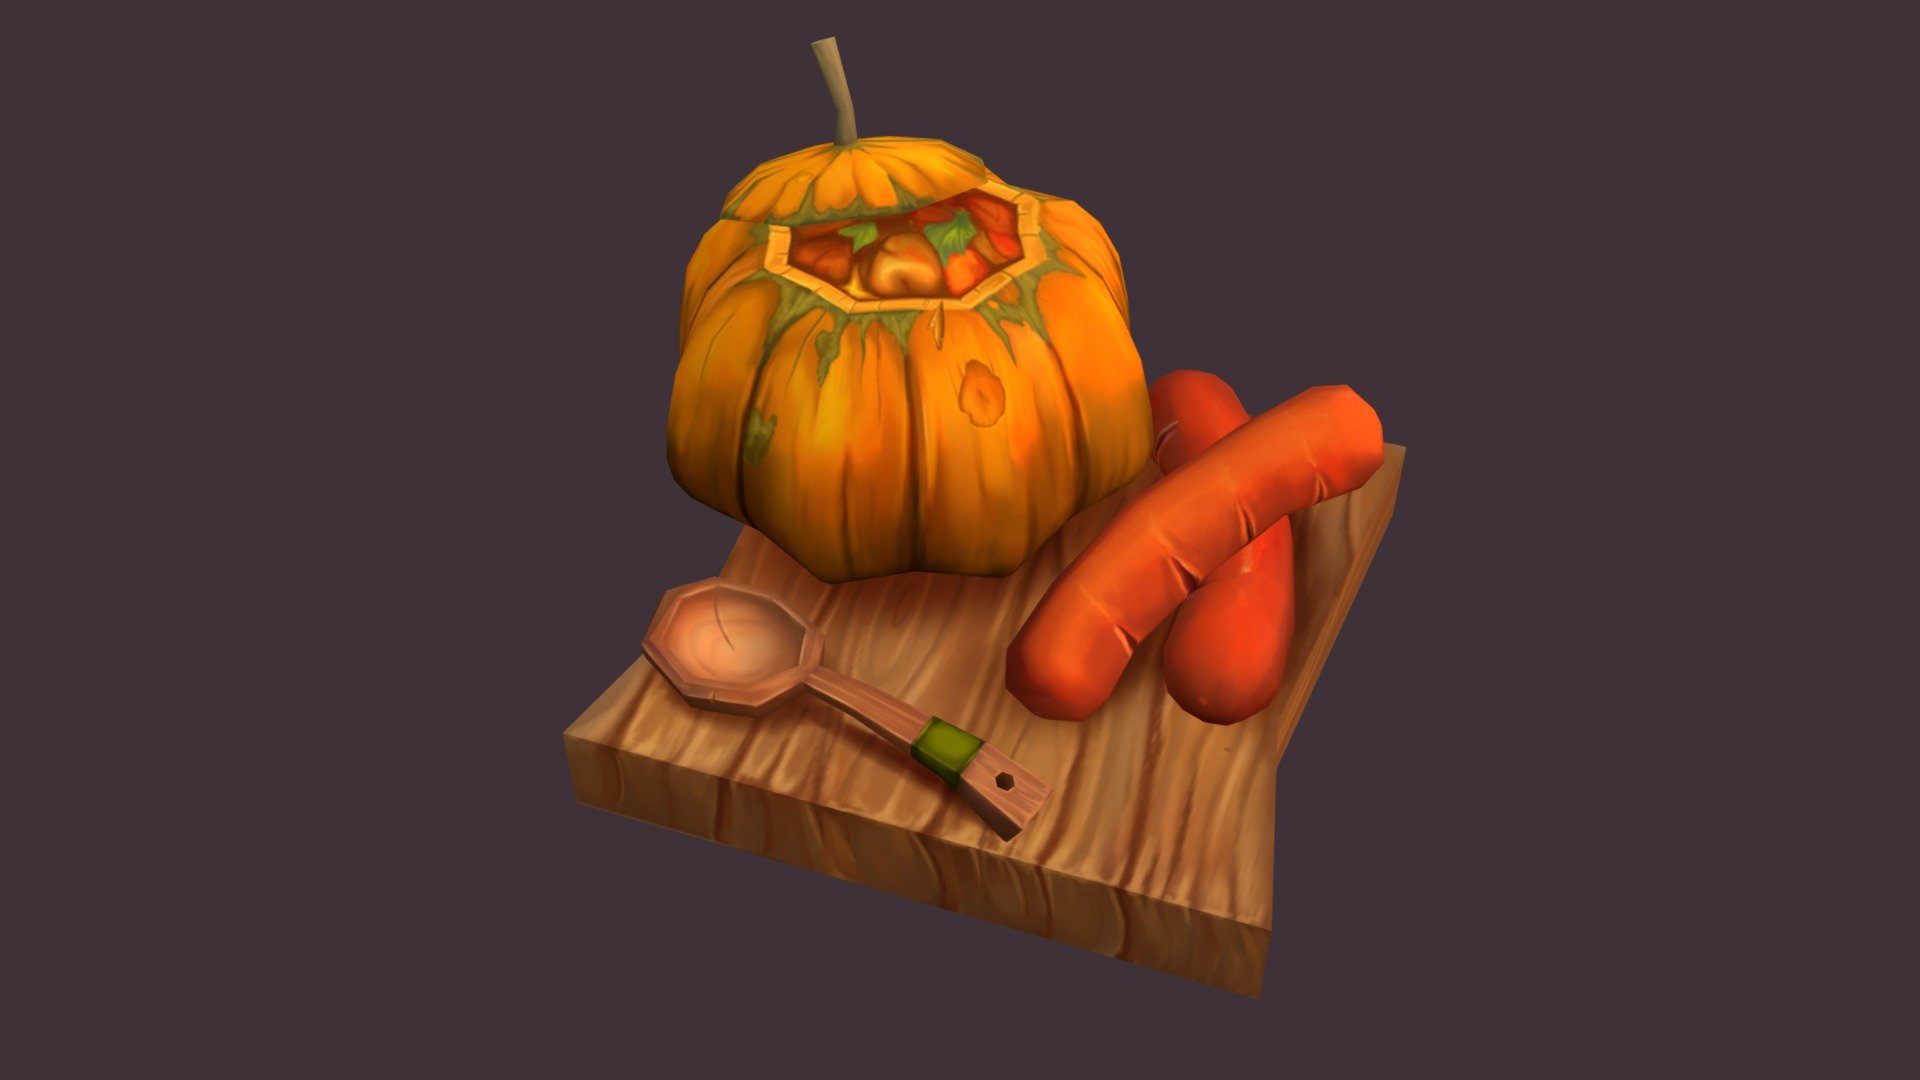 Entry for @curlscurly foodchallenge - Hand painted pumpkin and sausages - 3D model by Vitaly Zaytsev (@weegson) 3d model